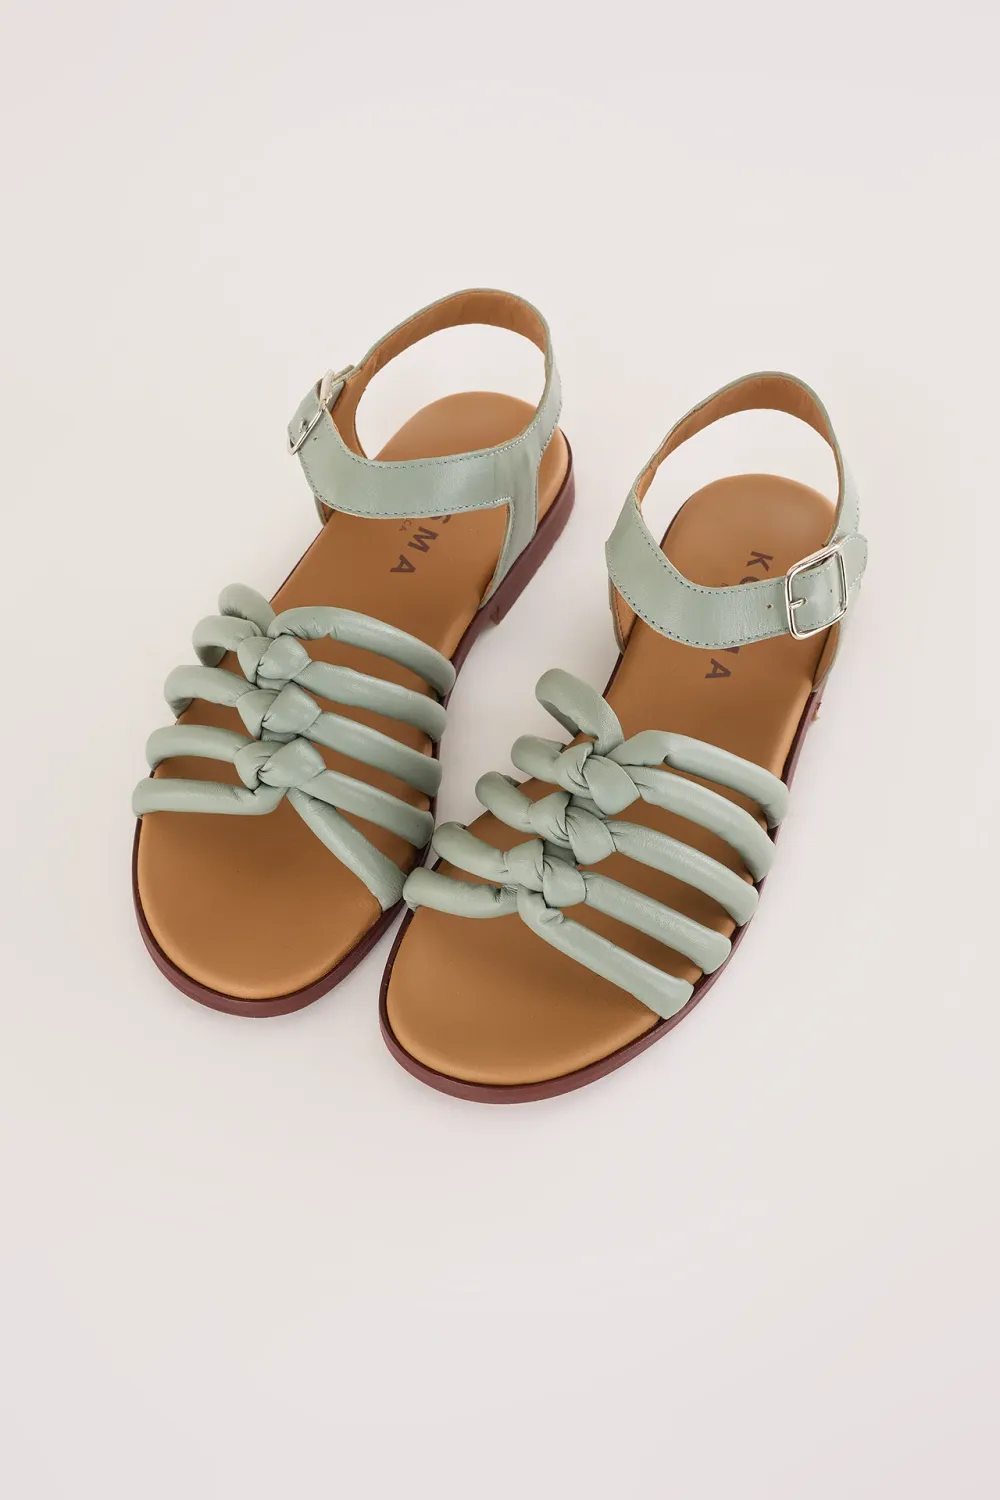 Kosma sandals with padded straps